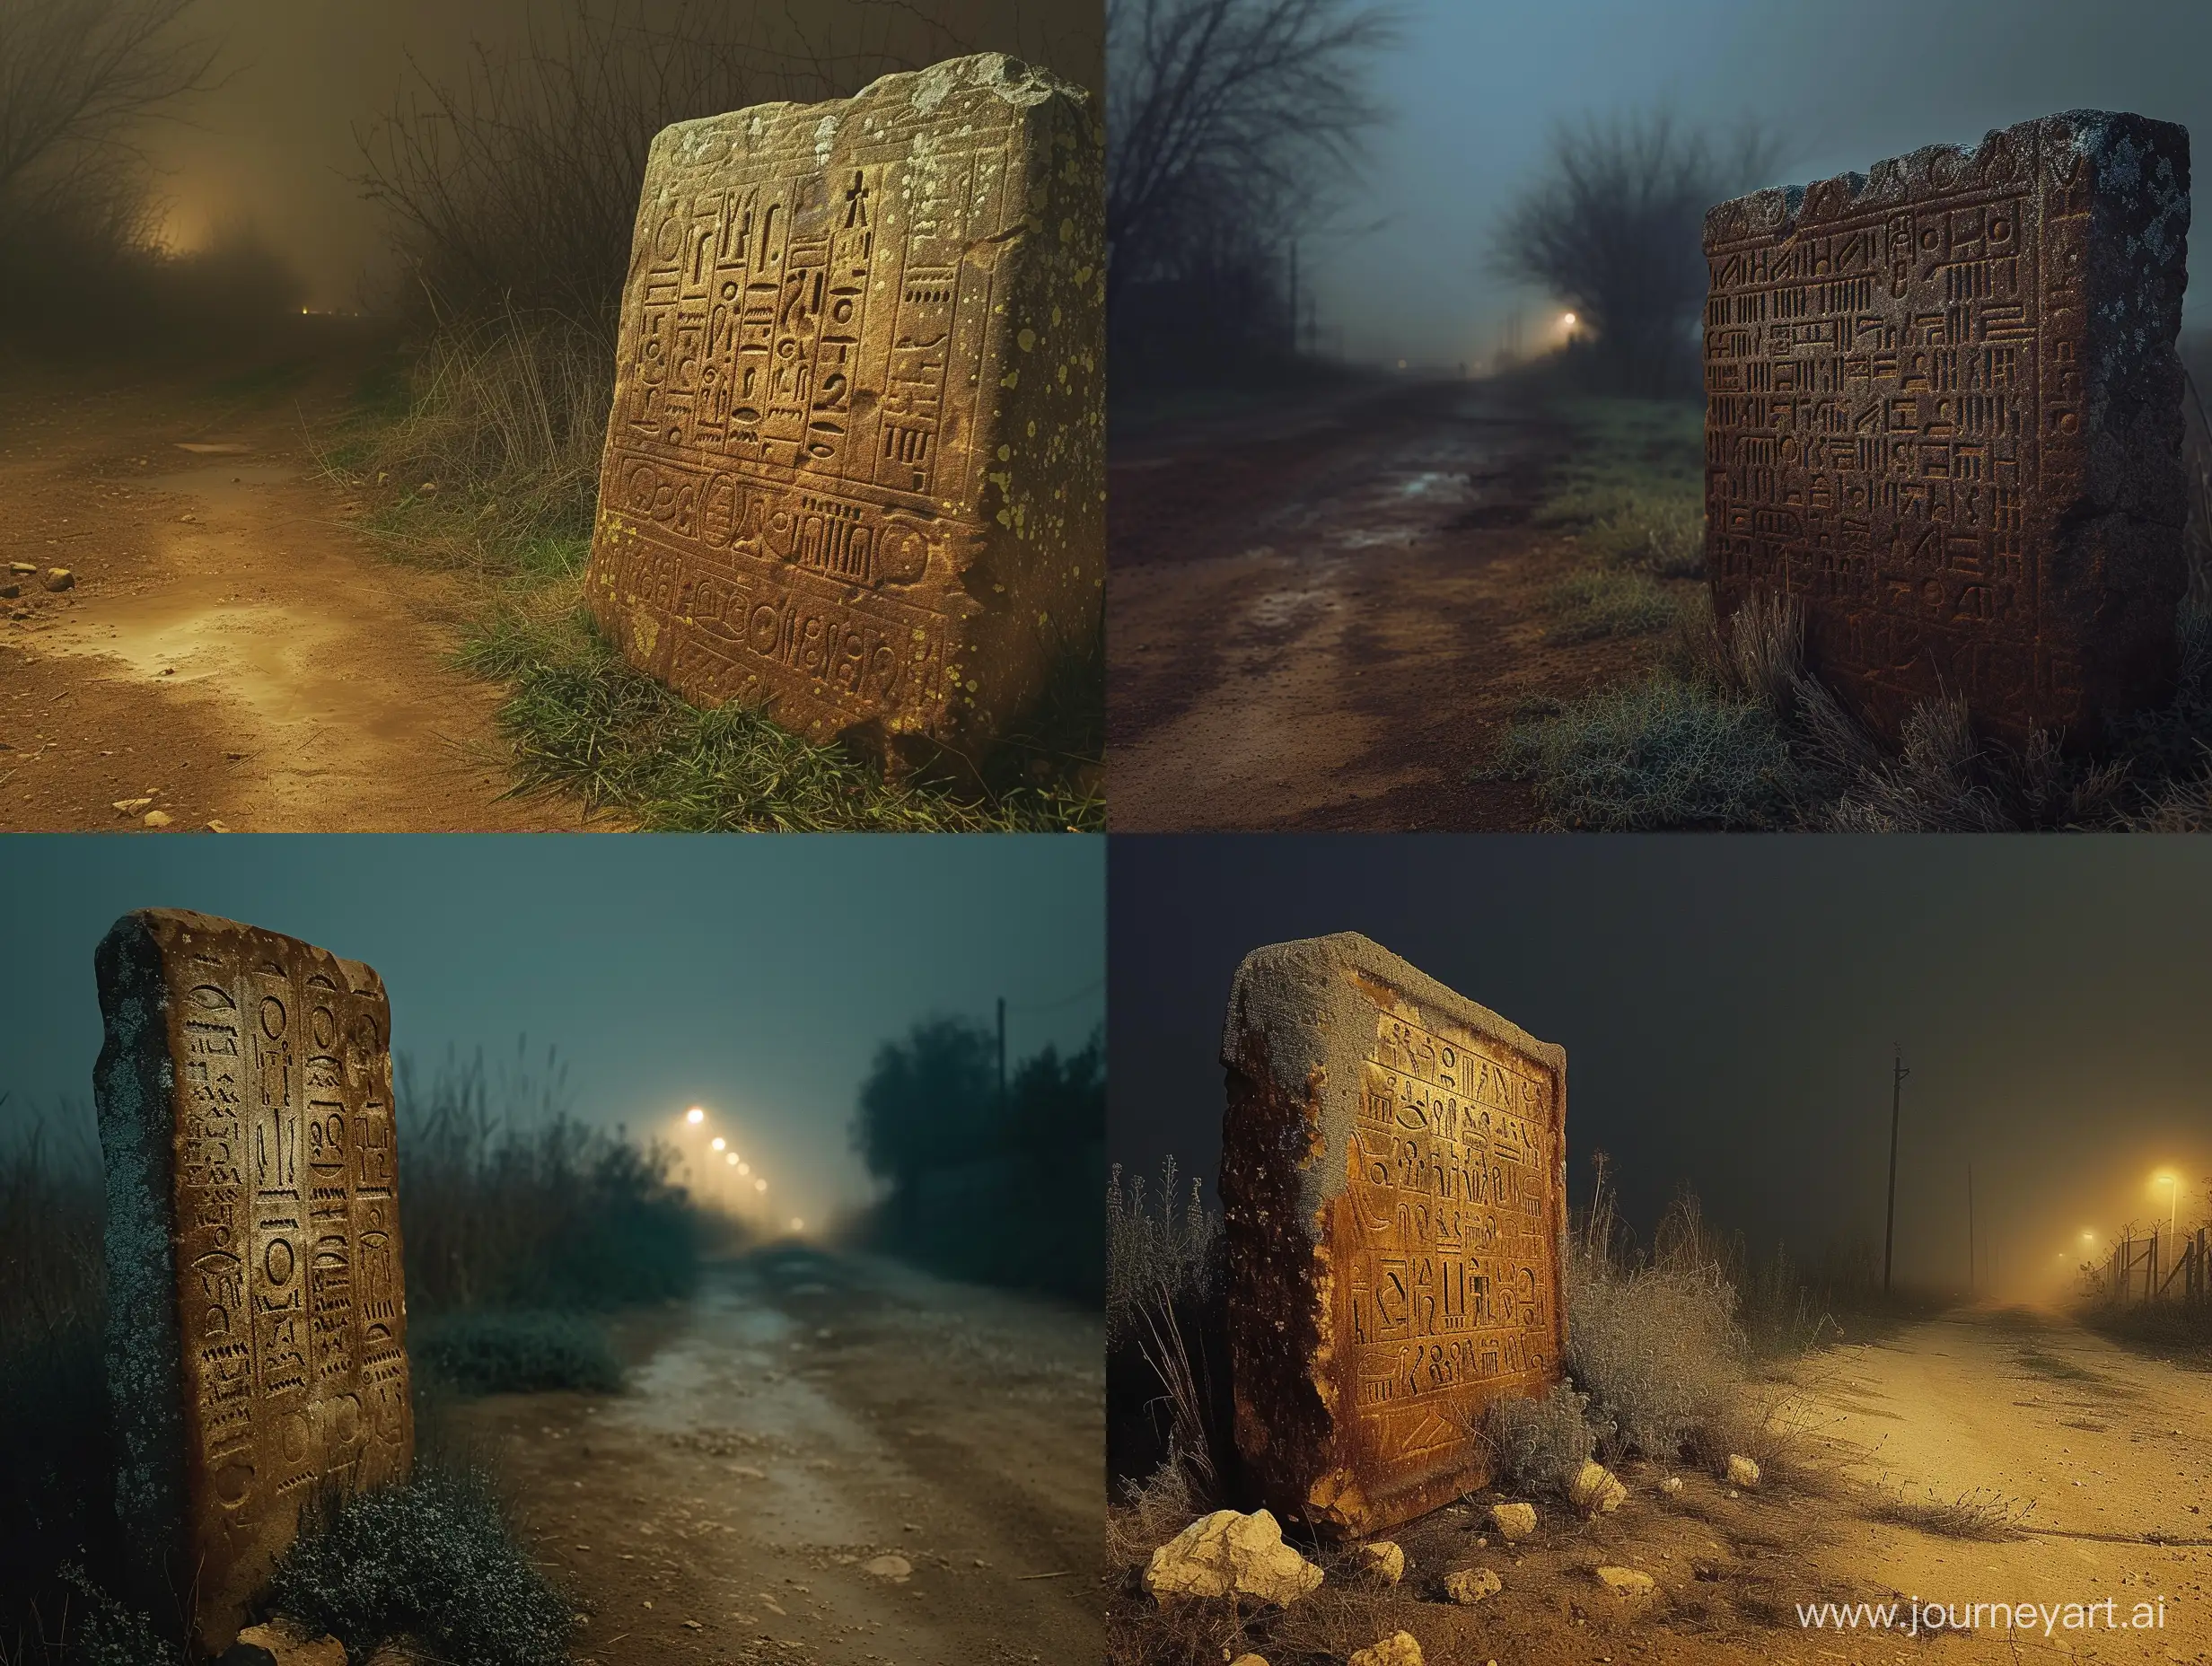 Ancient-Stone-with-Cuneiform-Inscription-Nighttime-Mystery-by-the-Dirt-Road